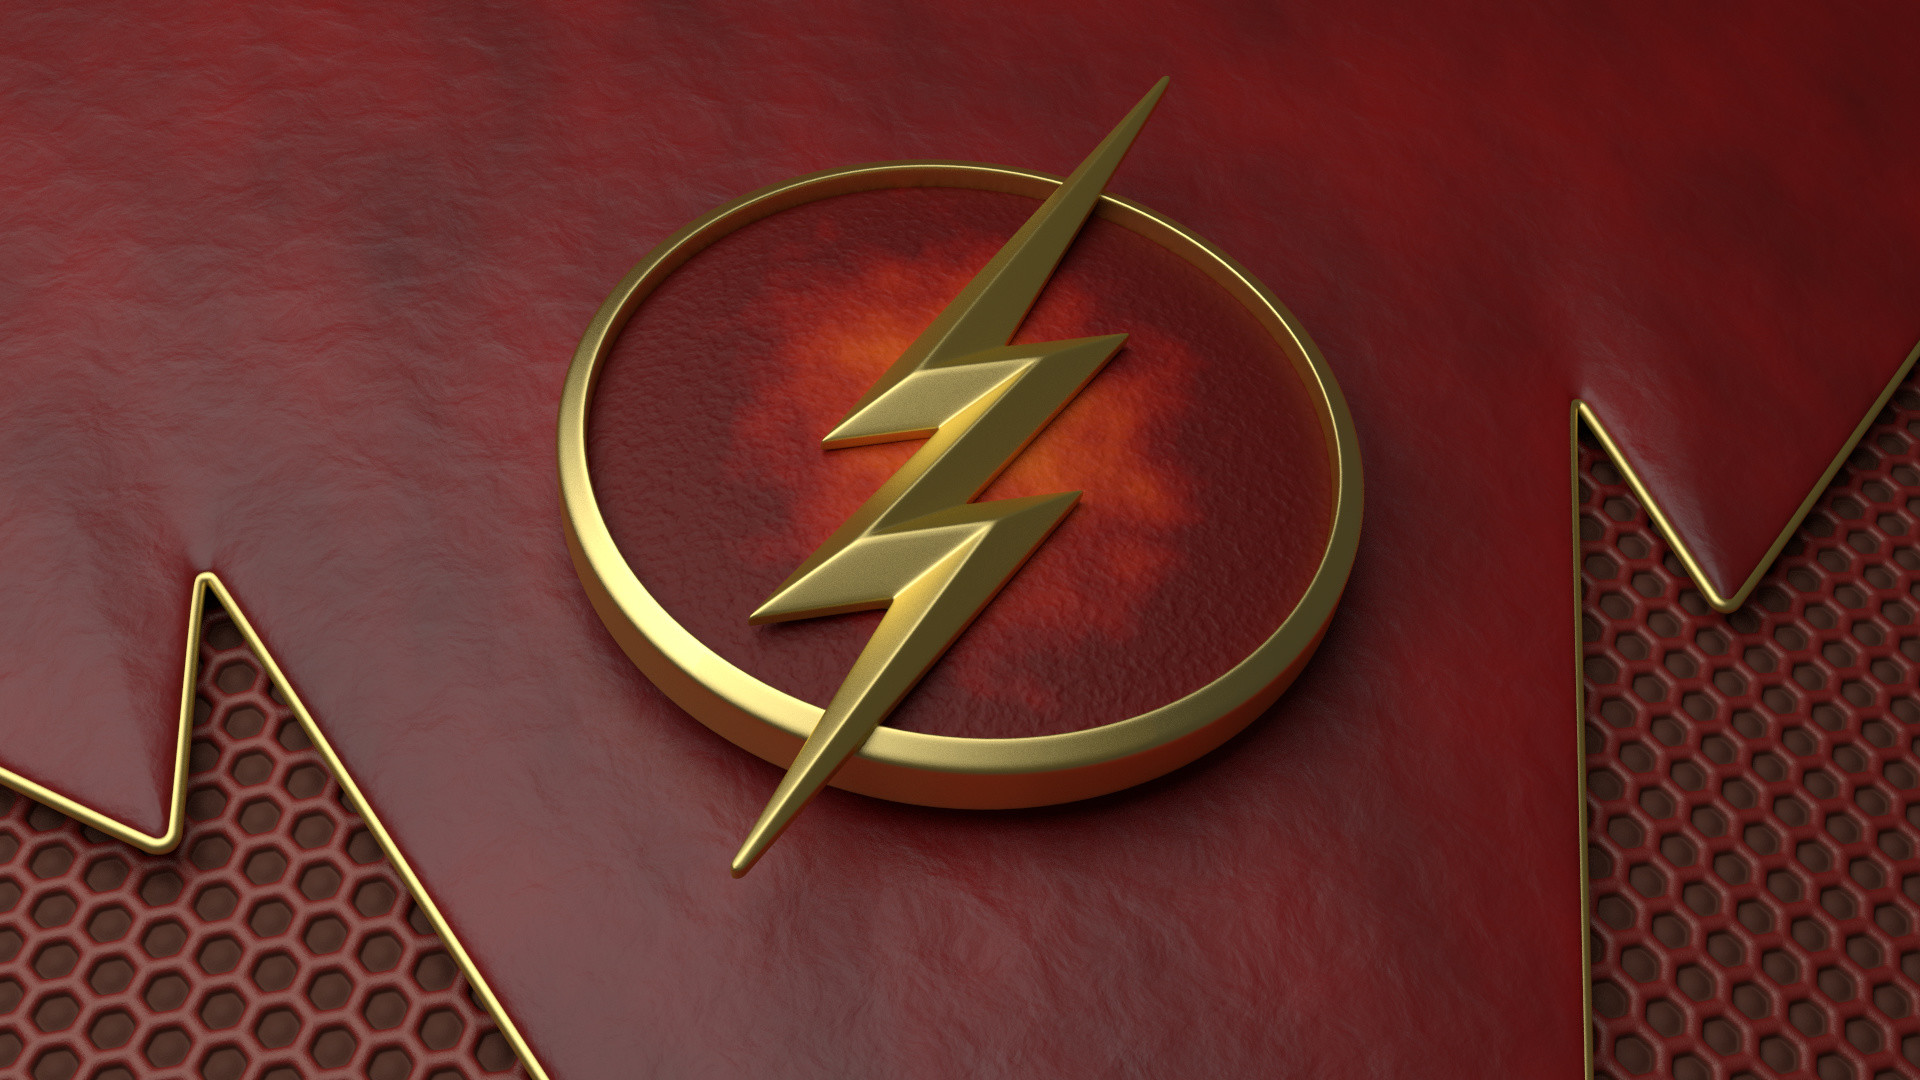 The Flash Wallpapers - Top Best The Flash Backgrounds Download